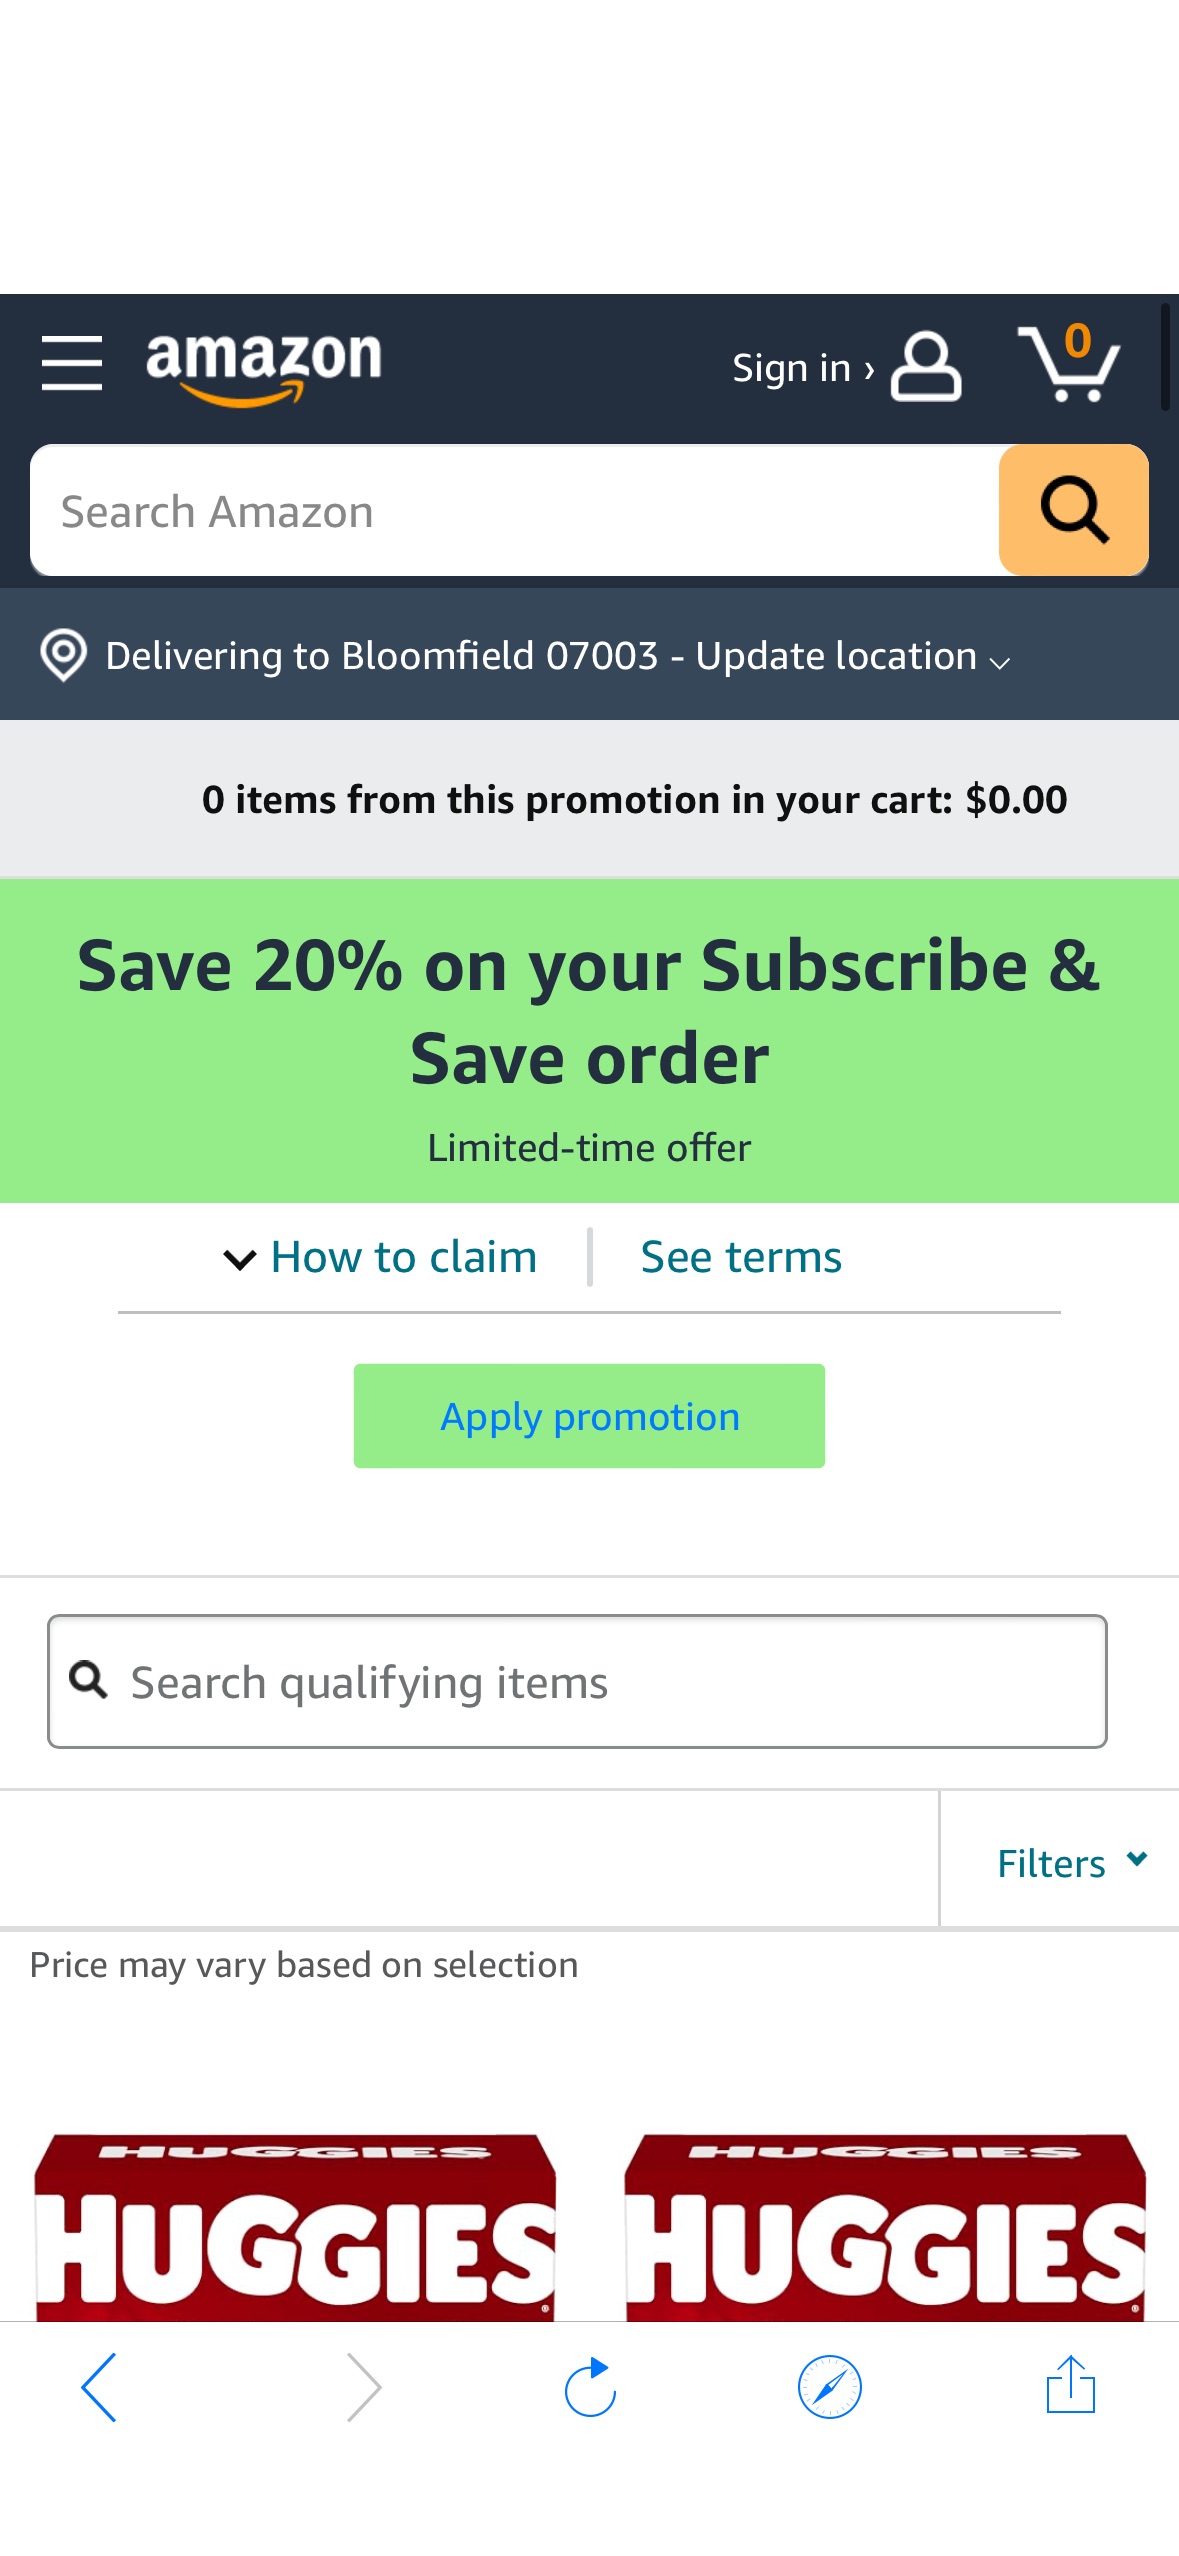 Amazon.com: Save 20% on your Subscribe & Save order promotion